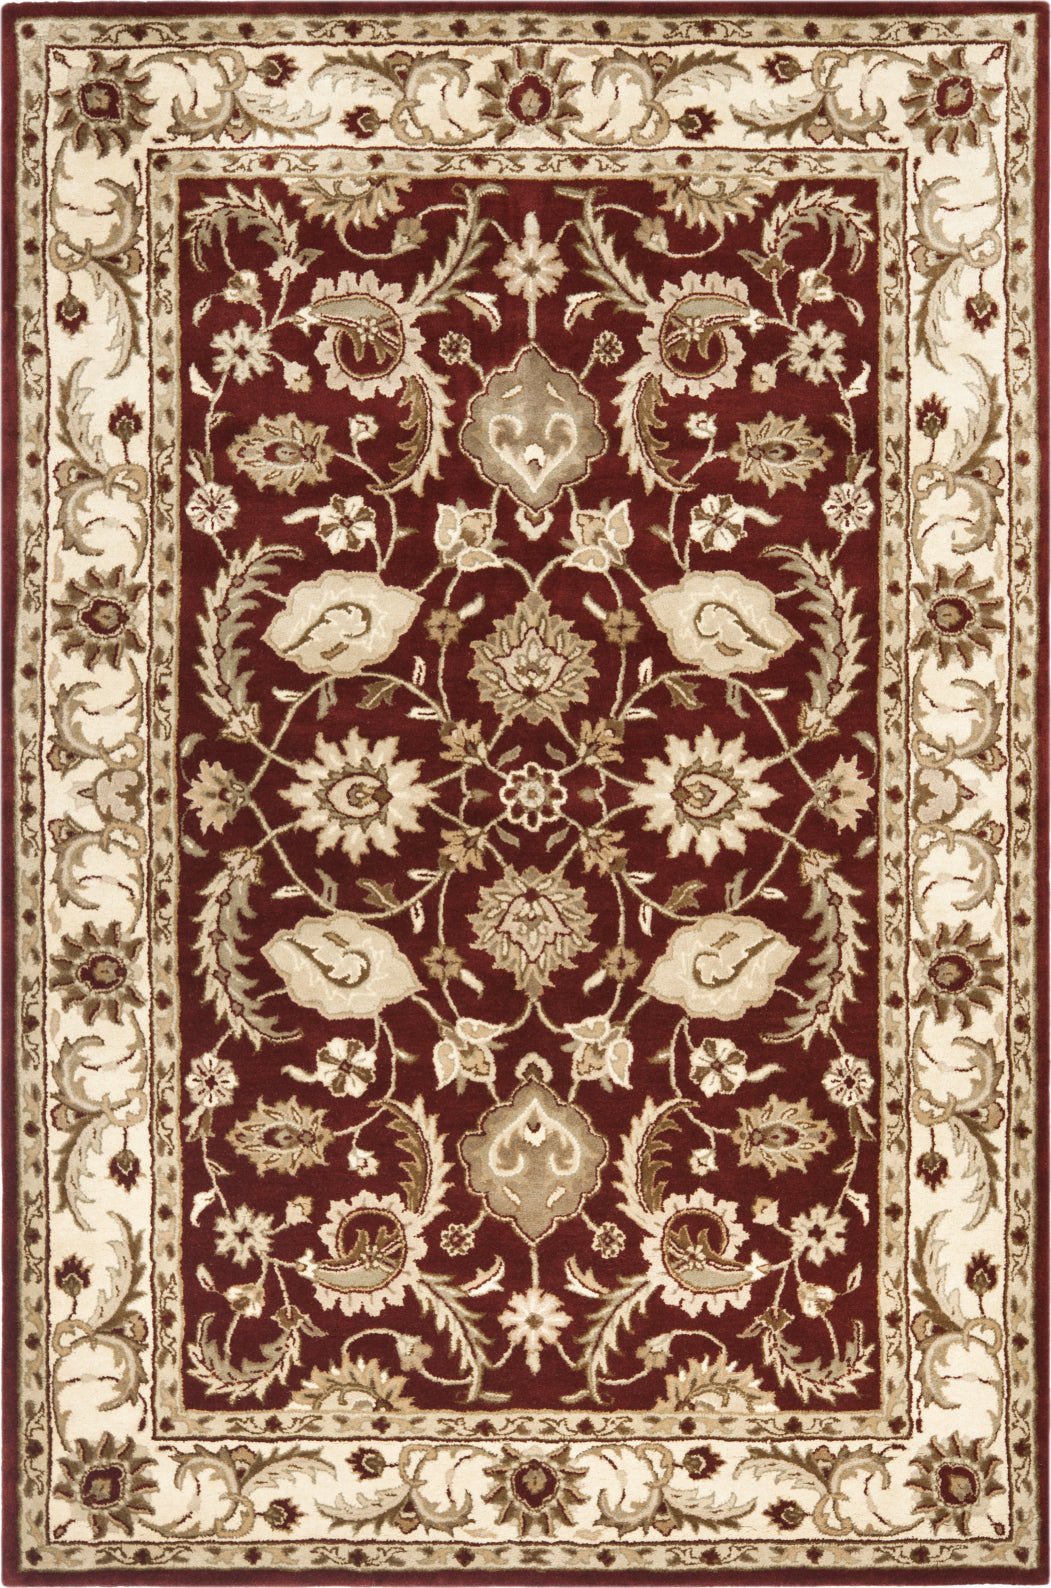 Safavieh Royalty Roy244 Red/Ivory Area Rug main image